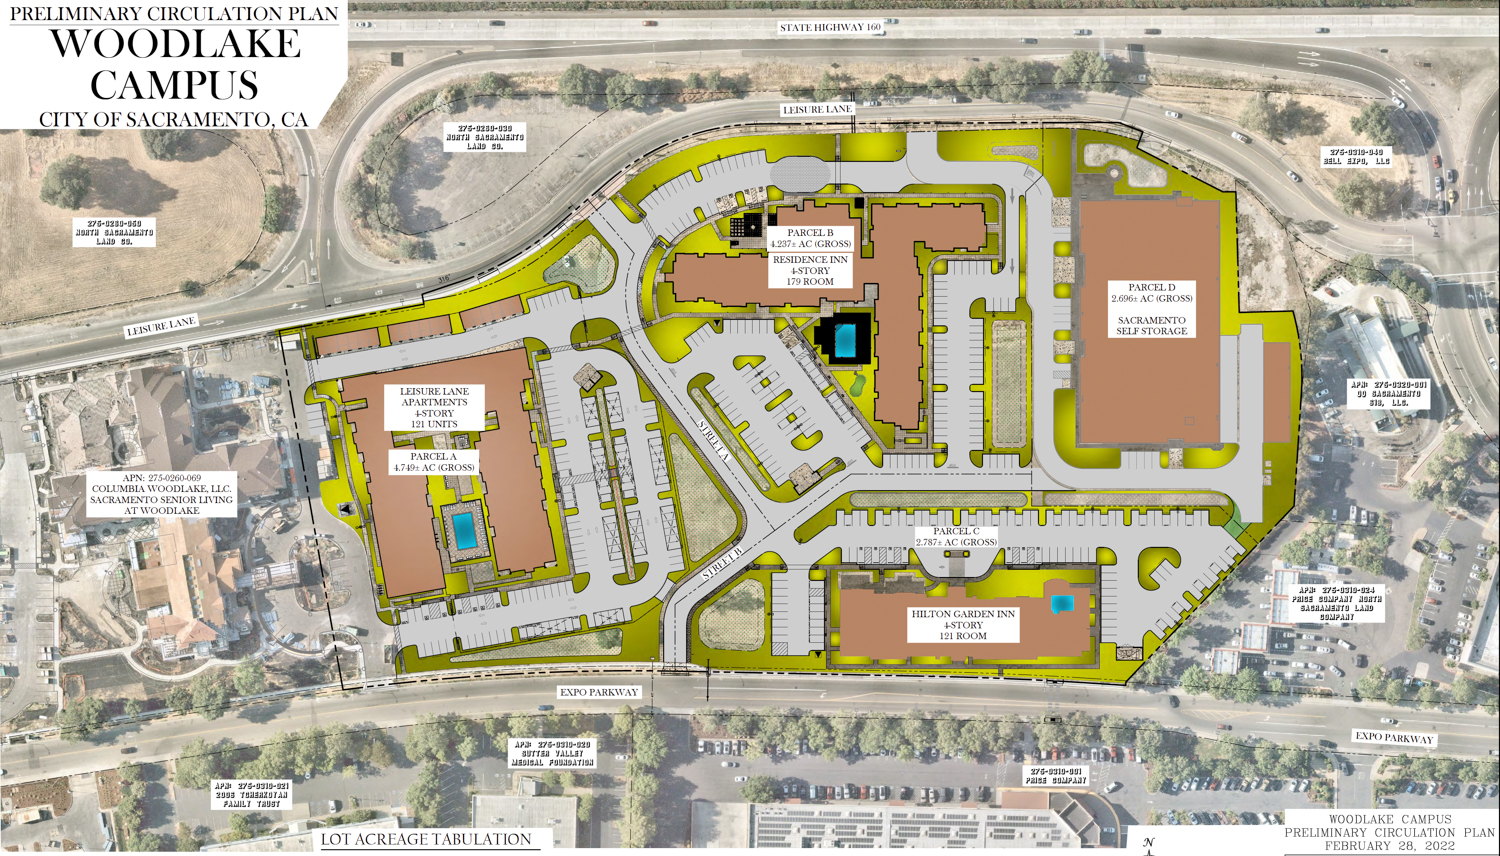 Woodlake Hotel Property site map, rendering by BSB Design